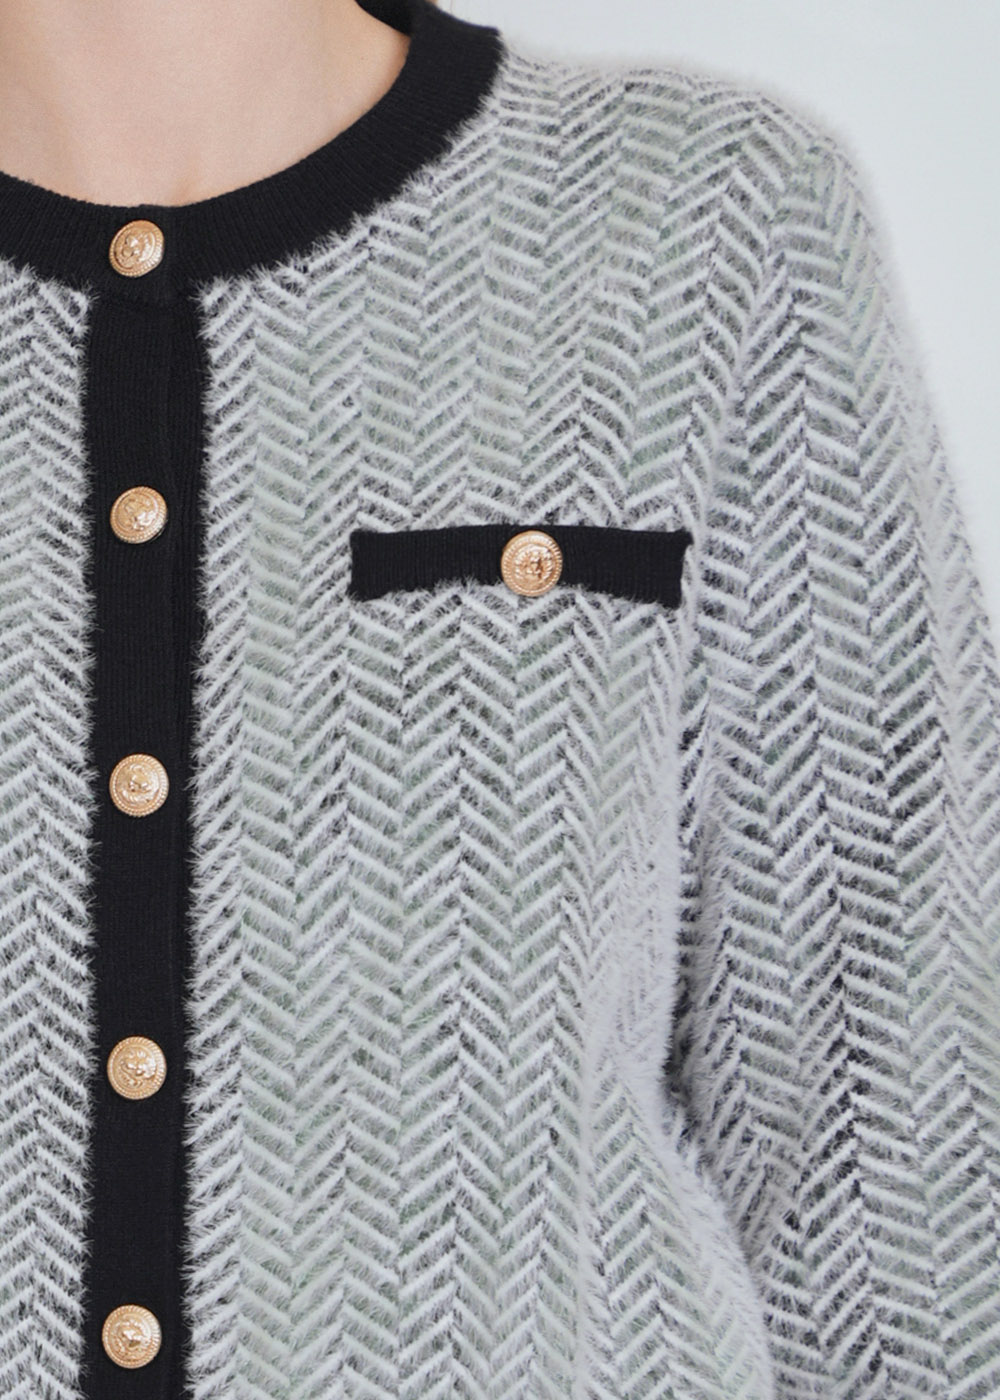 Allure in White: Warm Textured Cardigan with Gilded Button Details